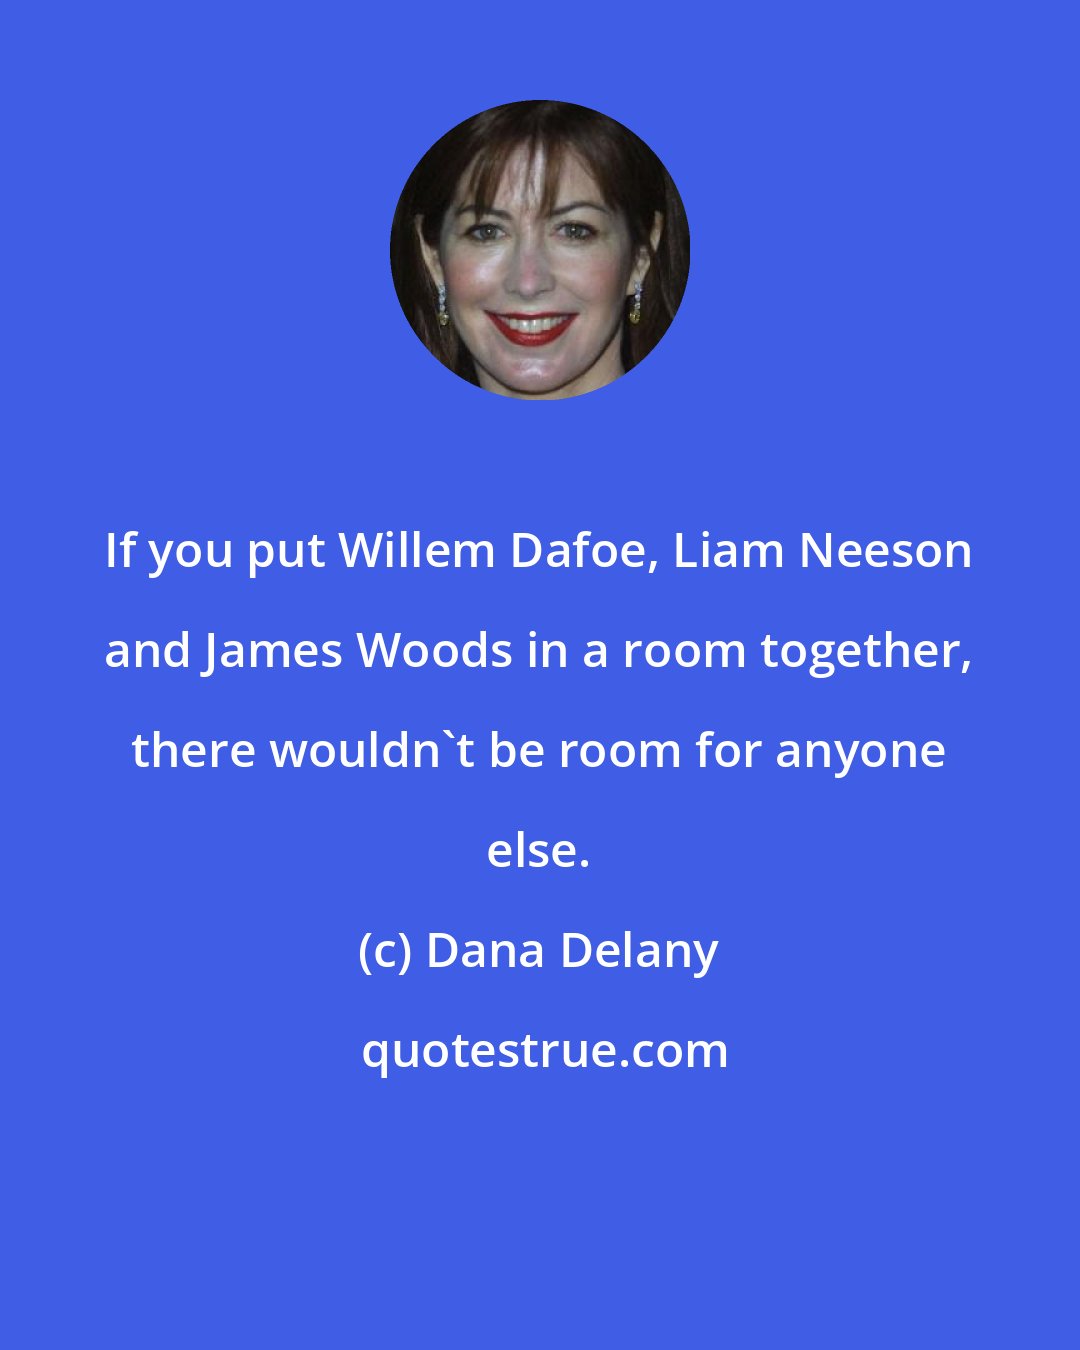 Dana Delany: If you put Willem Dafoe, Liam Neeson and James Woods in a room together, there wouldn't be room for anyone else.